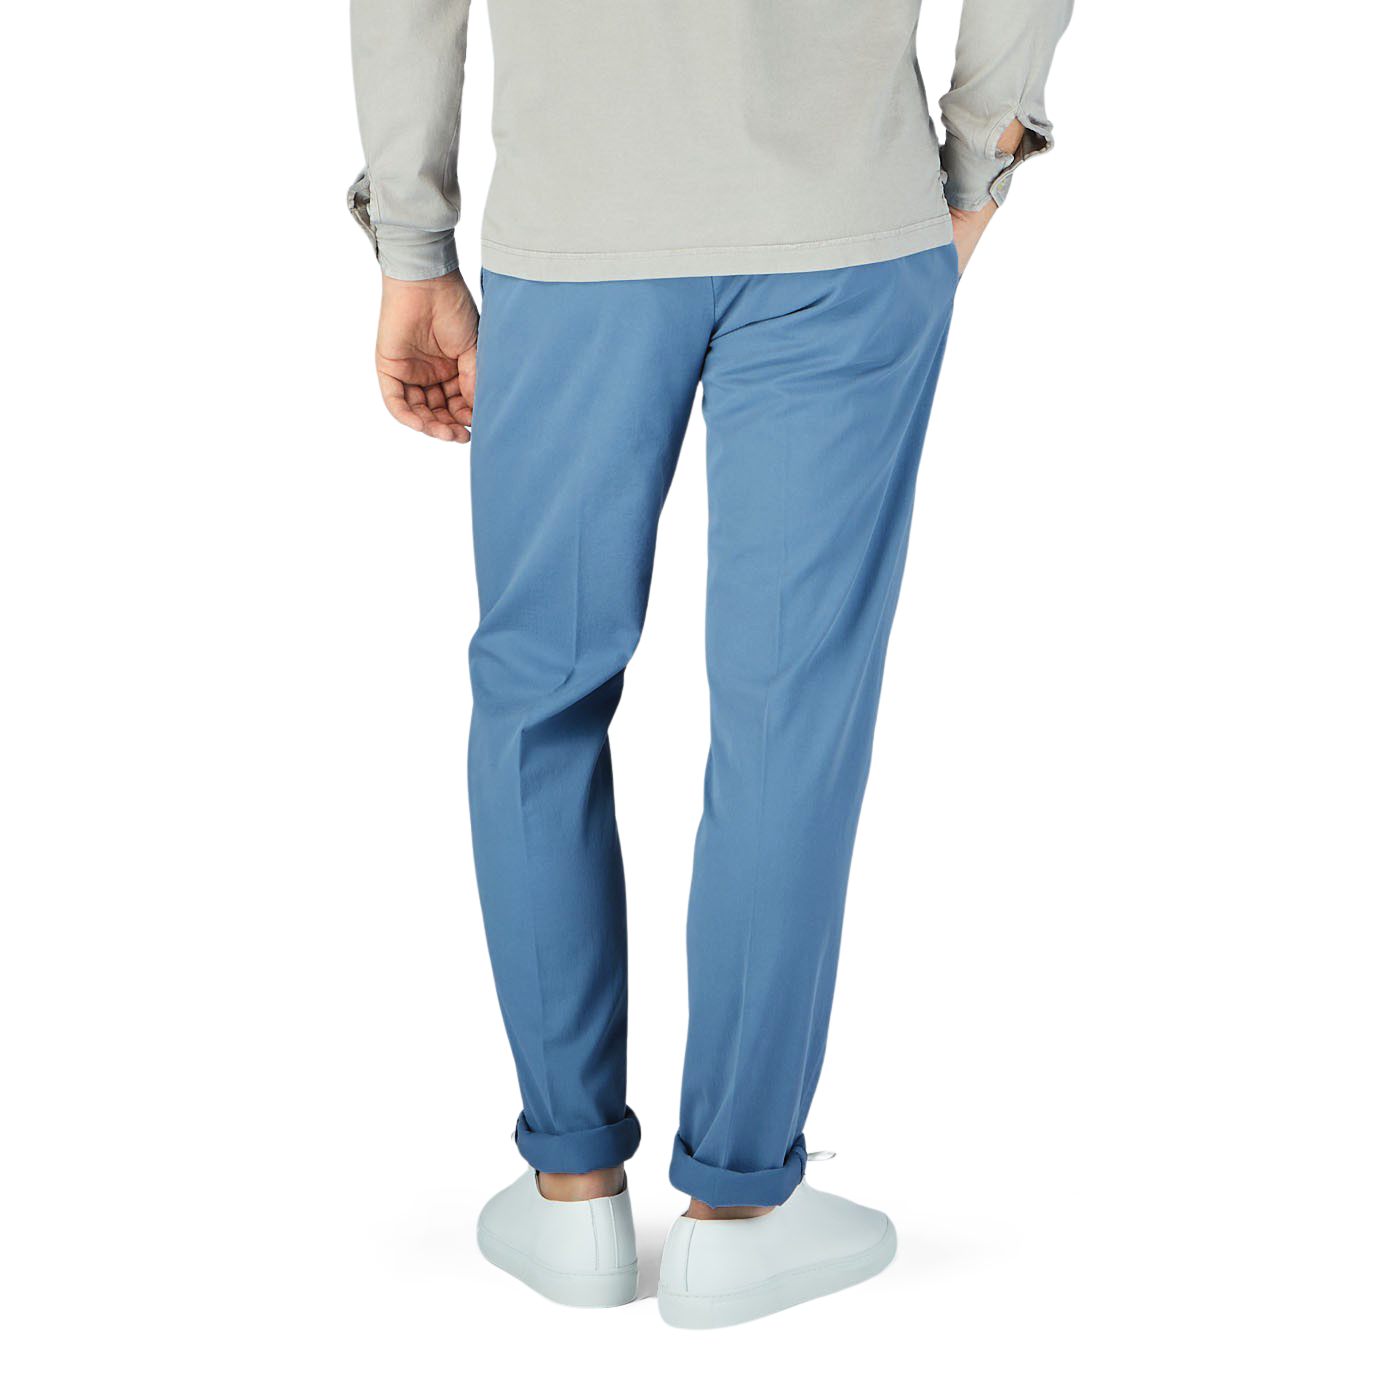 A man is seen from behind wearing Canali Light Blue Cotton Stretch Flat Front Chinos.